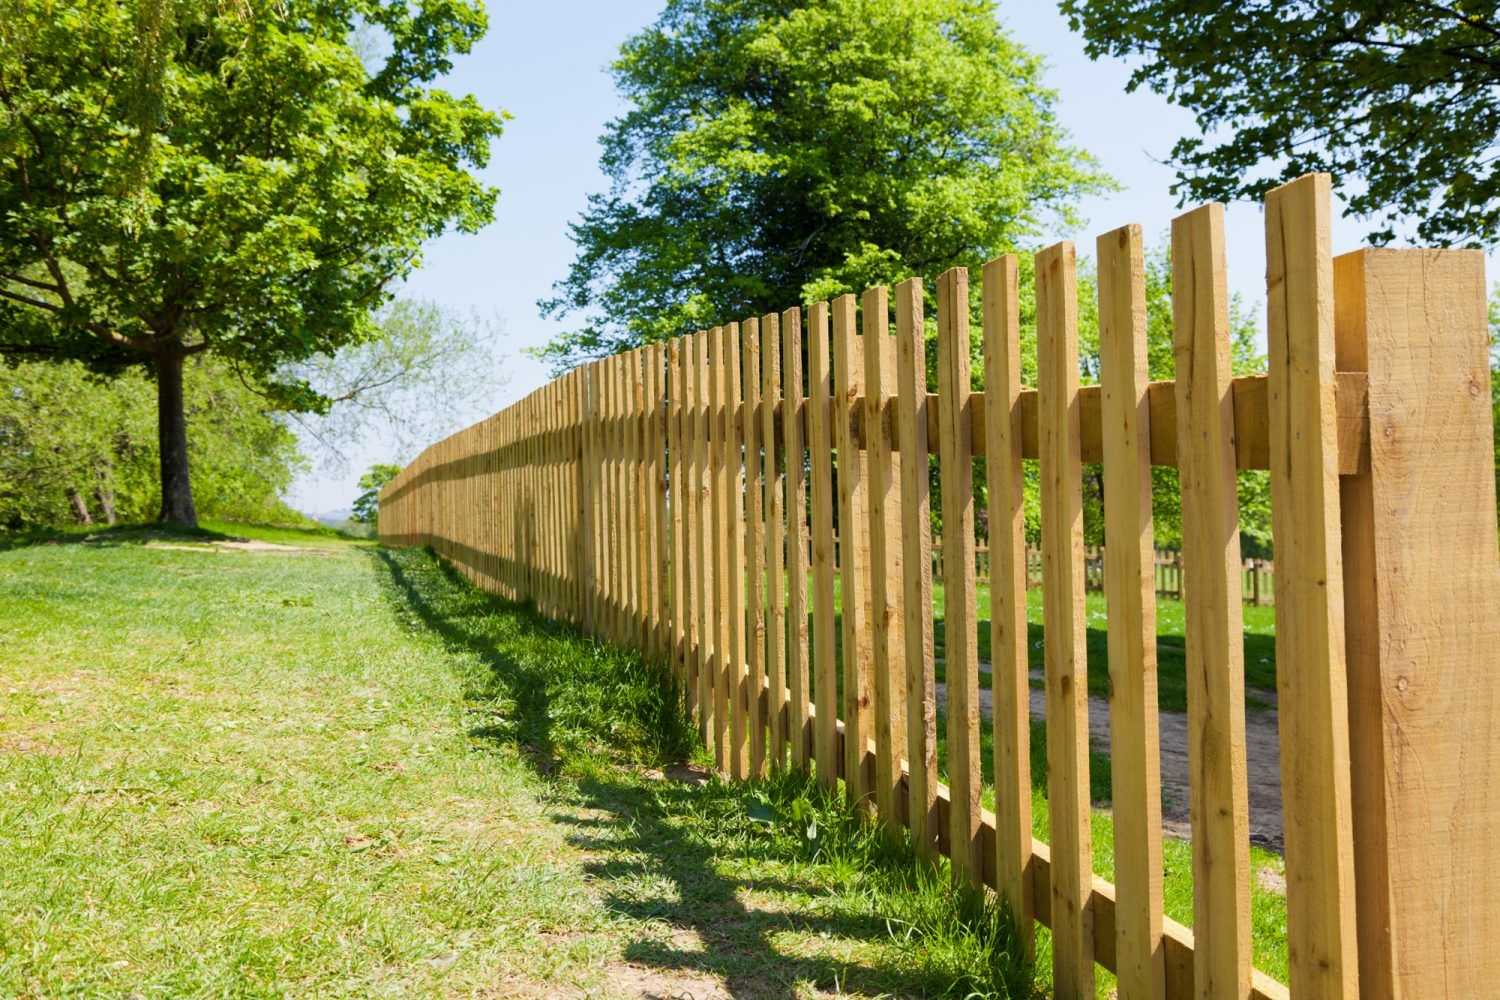 Wooden Fence in Greenery